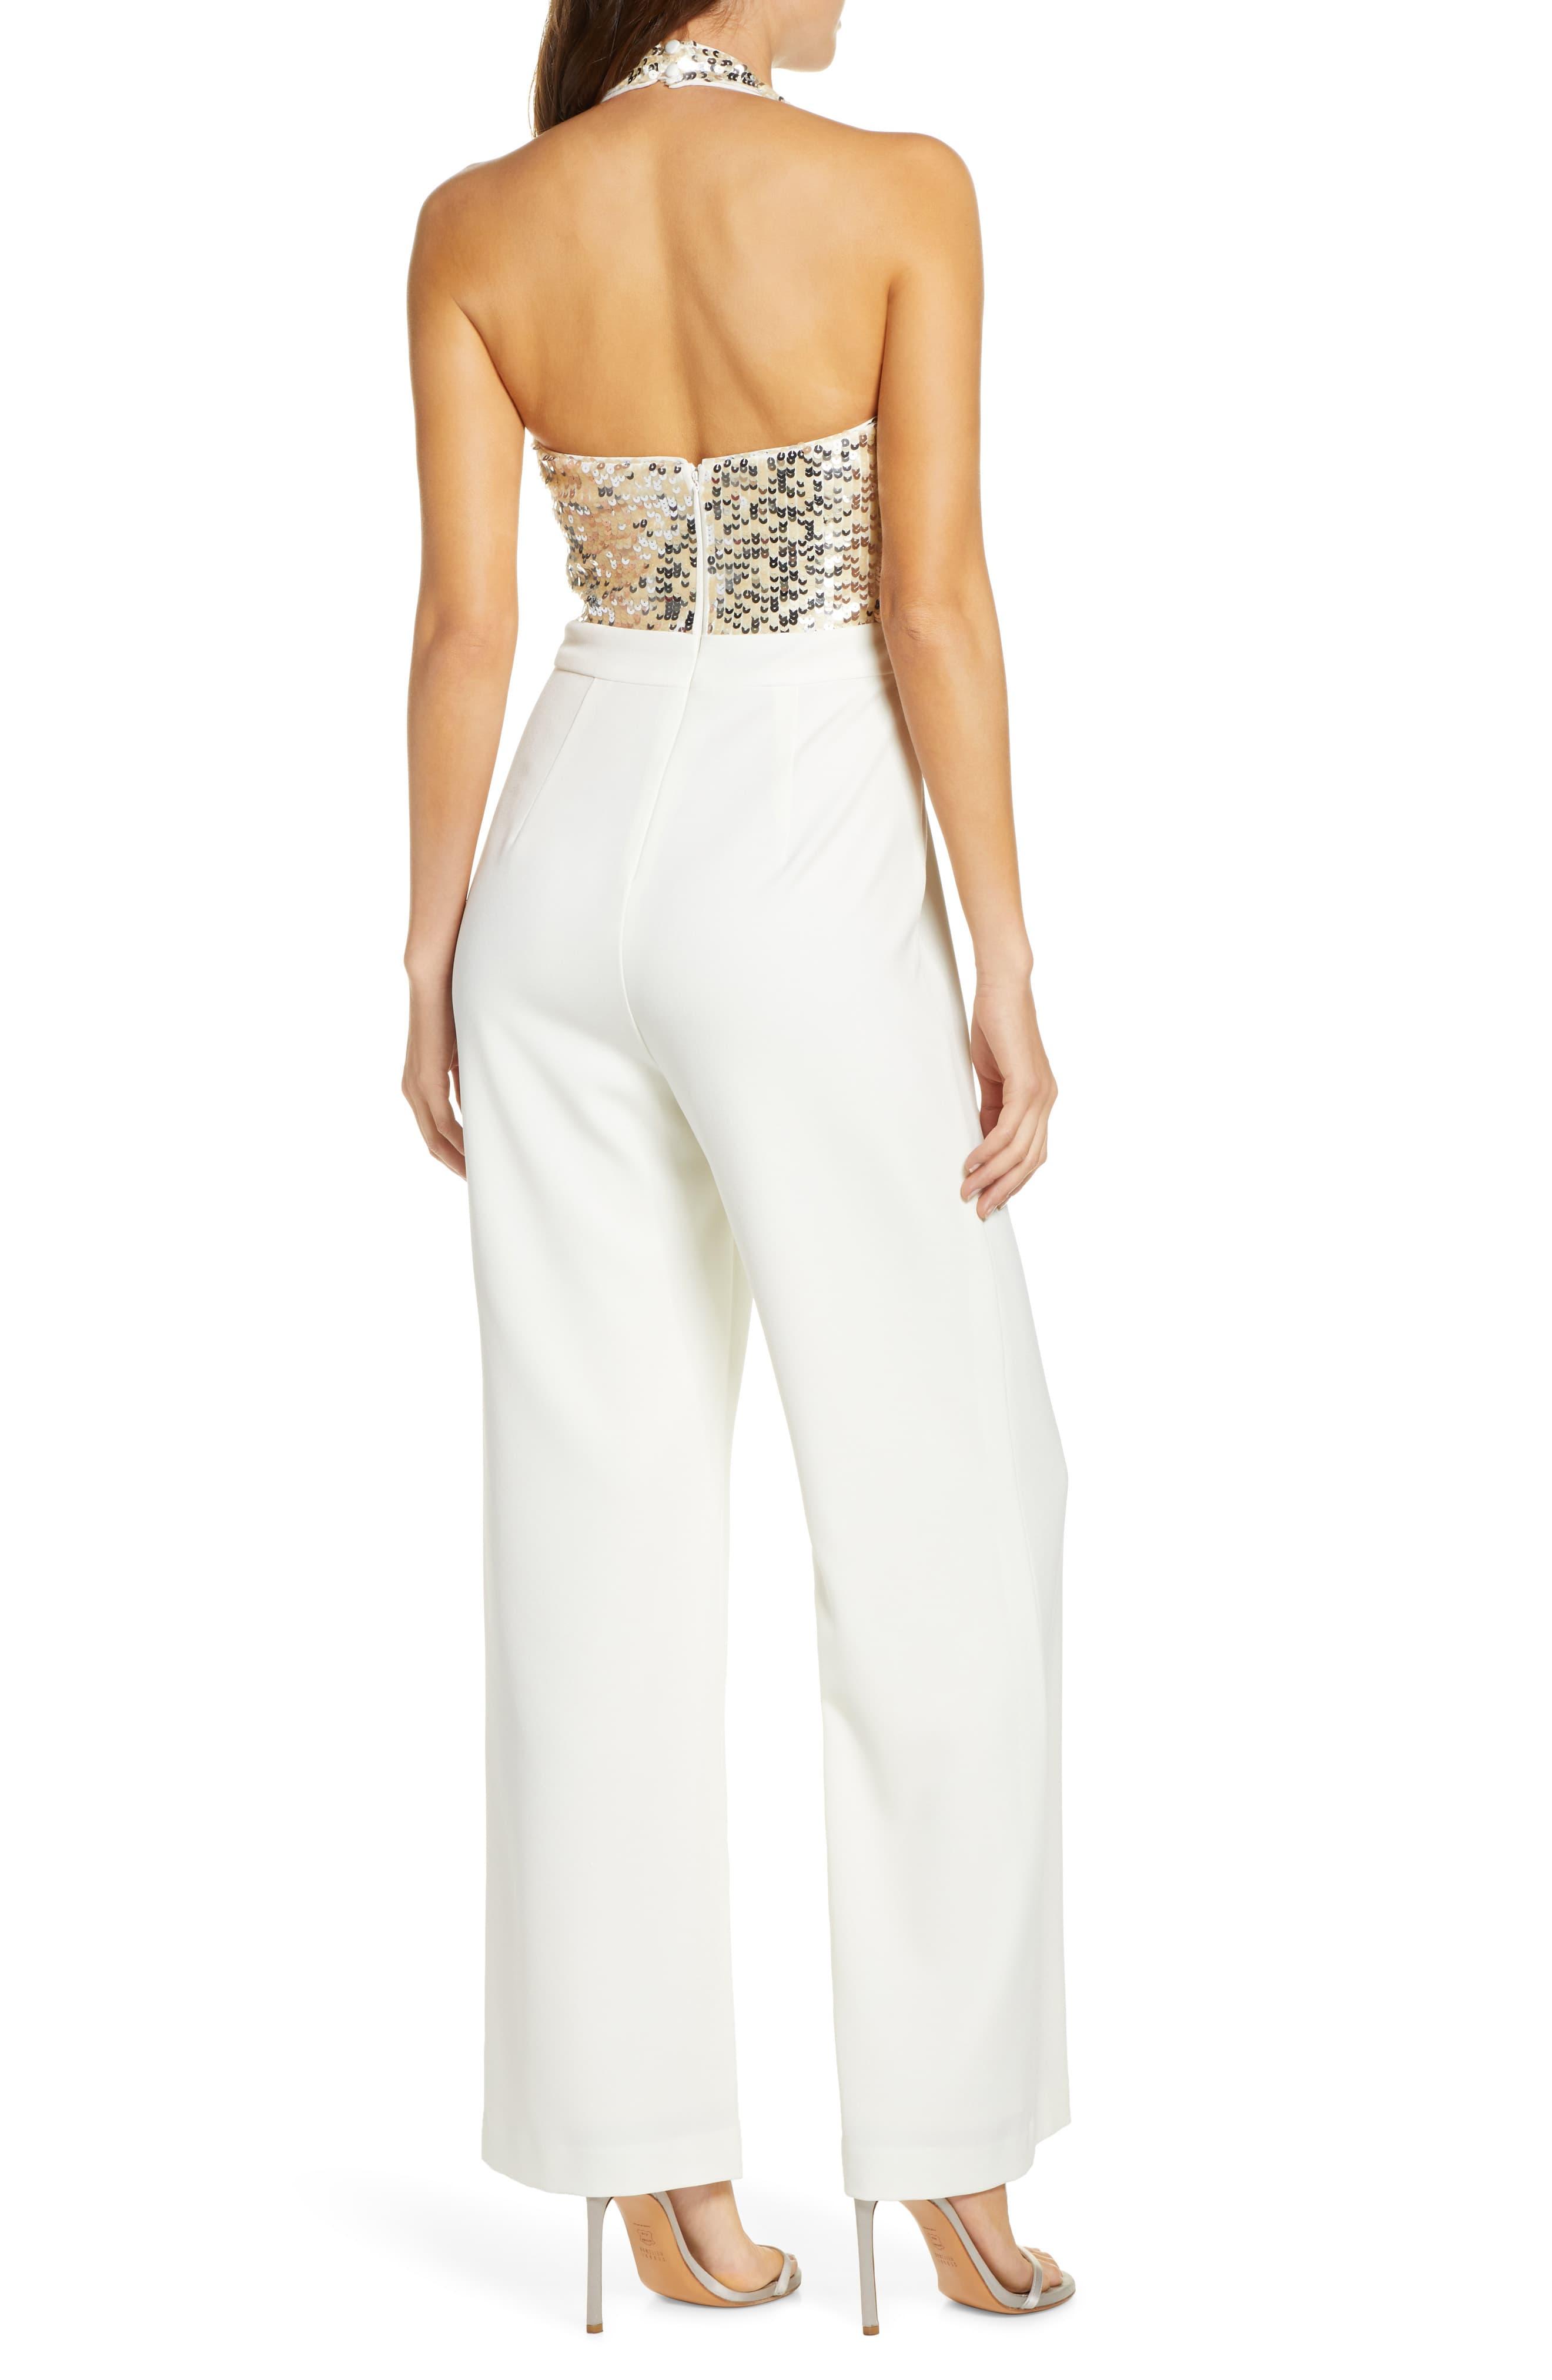 Vince Camuto Sequin & Crepe Halter Jumpsuit in Ivory (White) - Lyst